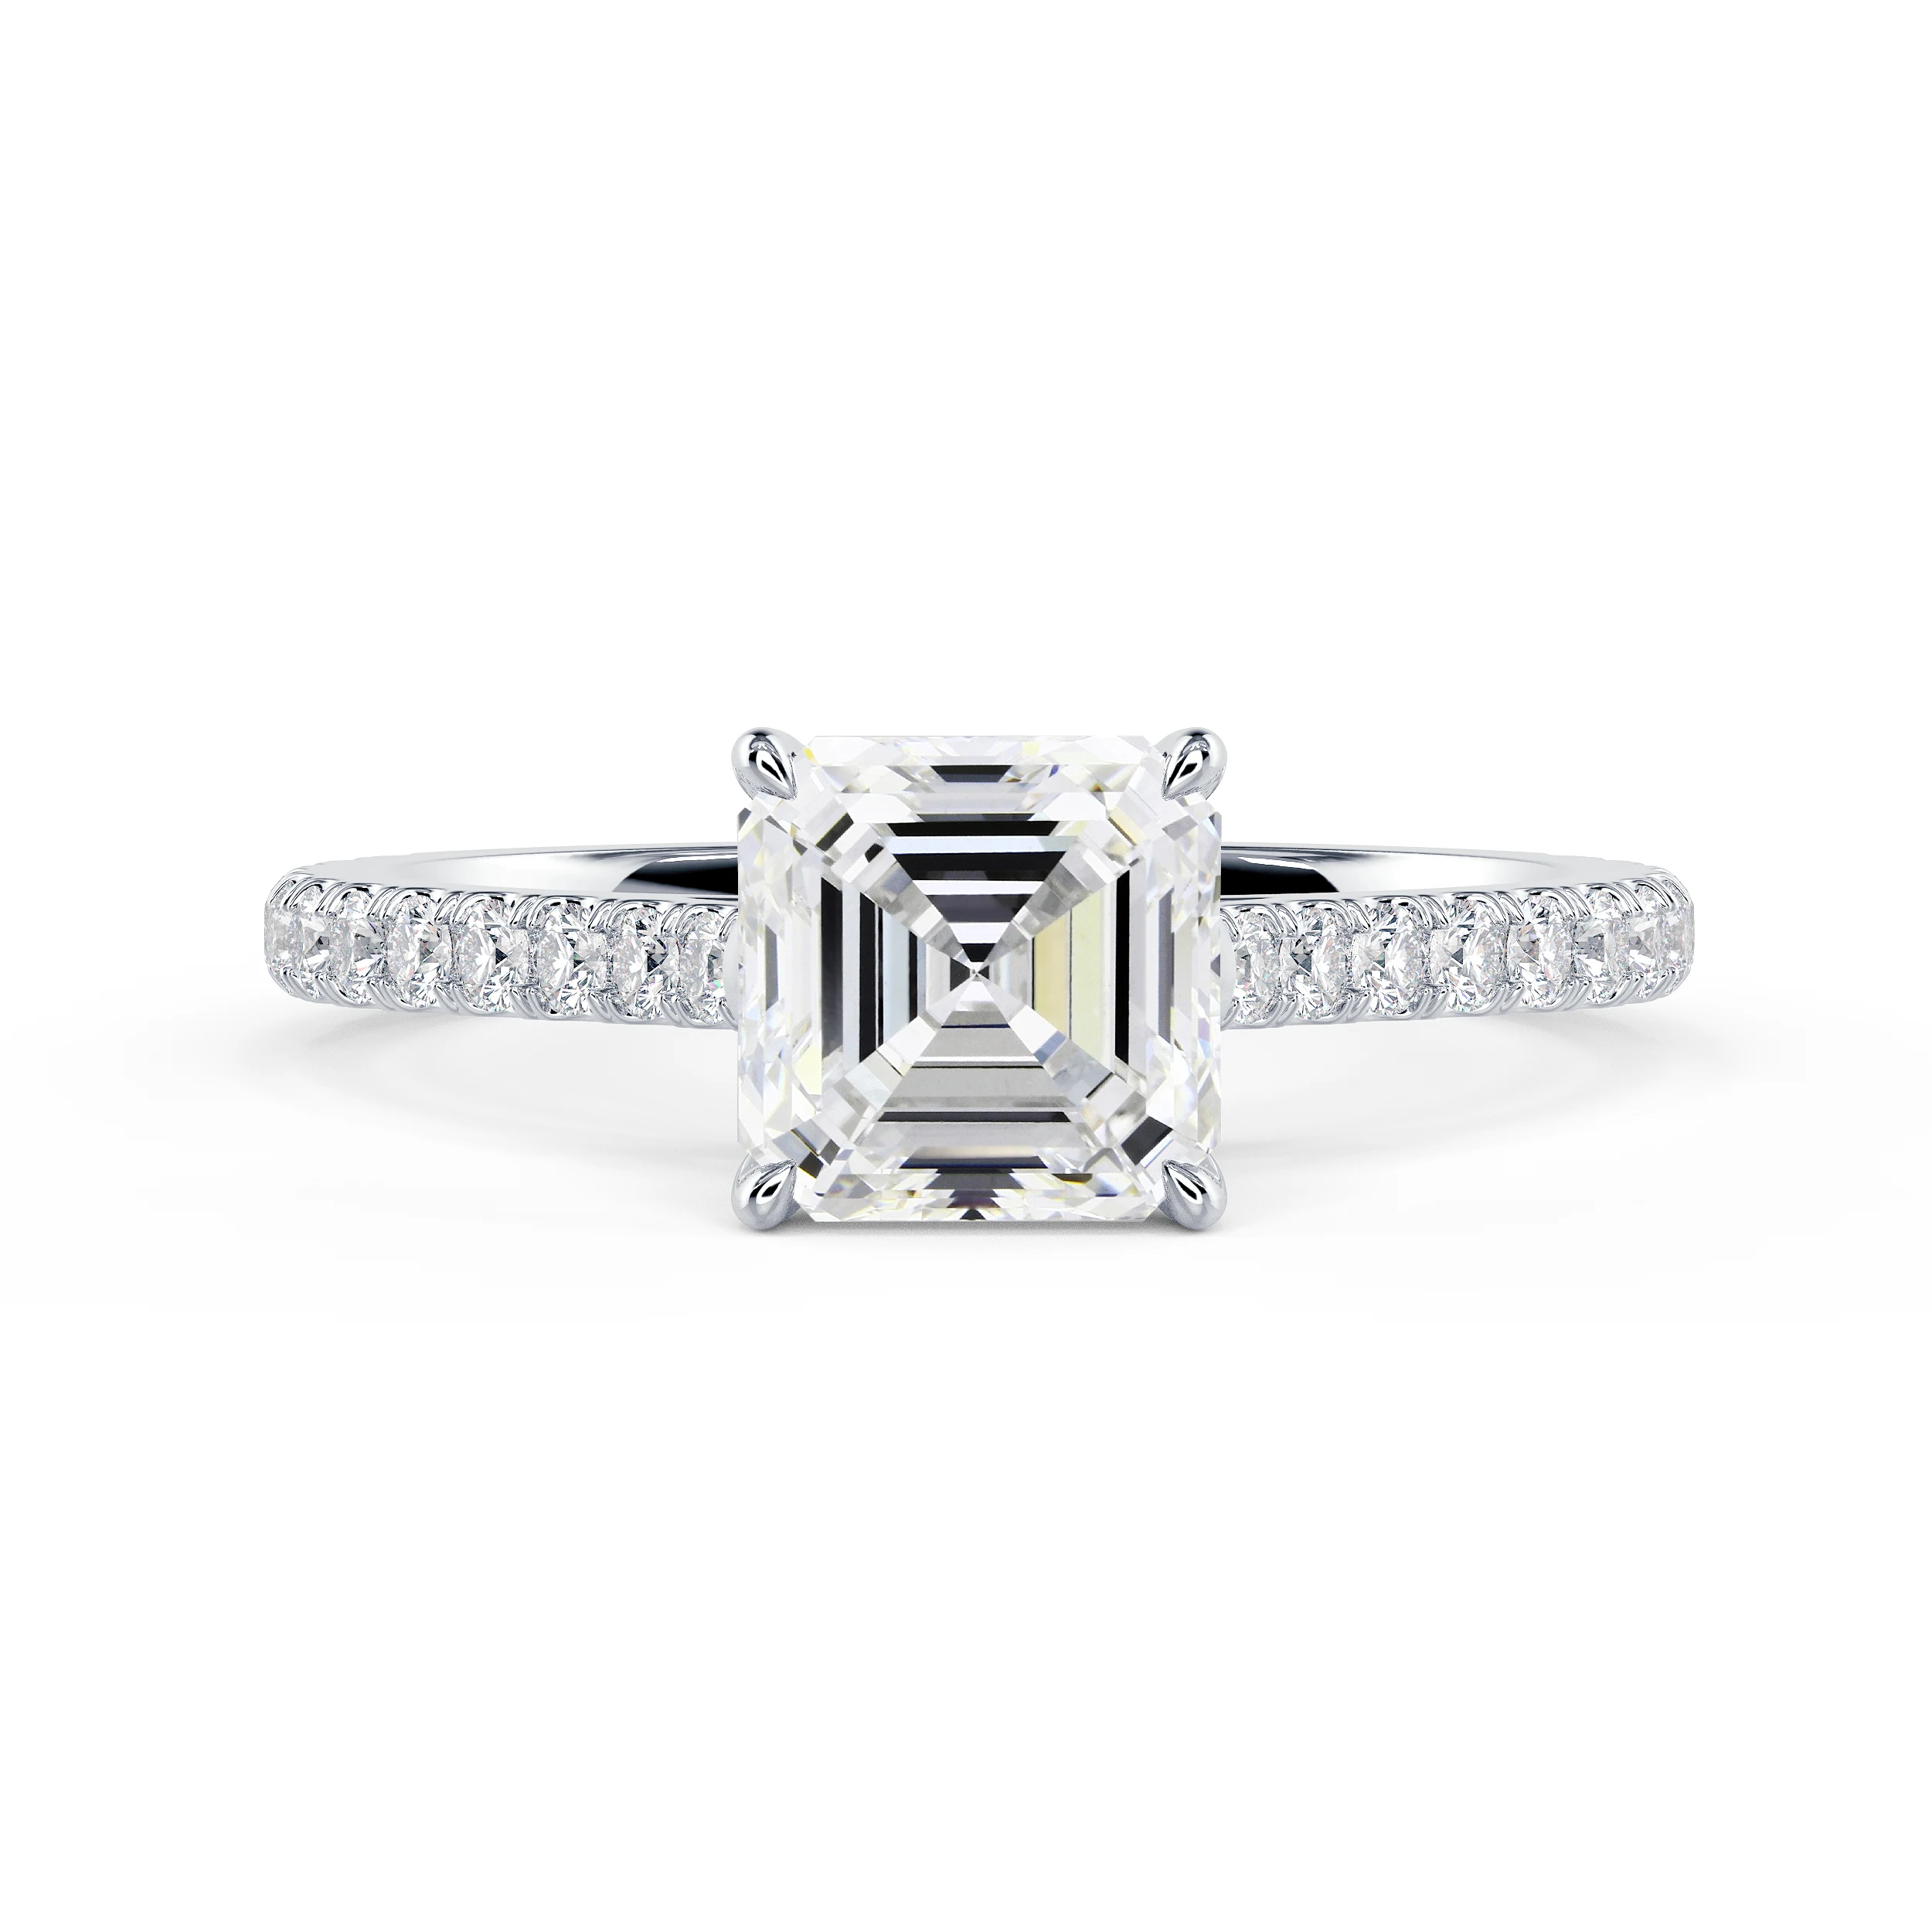 Hand Selected Diamonds set in White Gold Asscher Cathedral Pavé Setting (Main View)